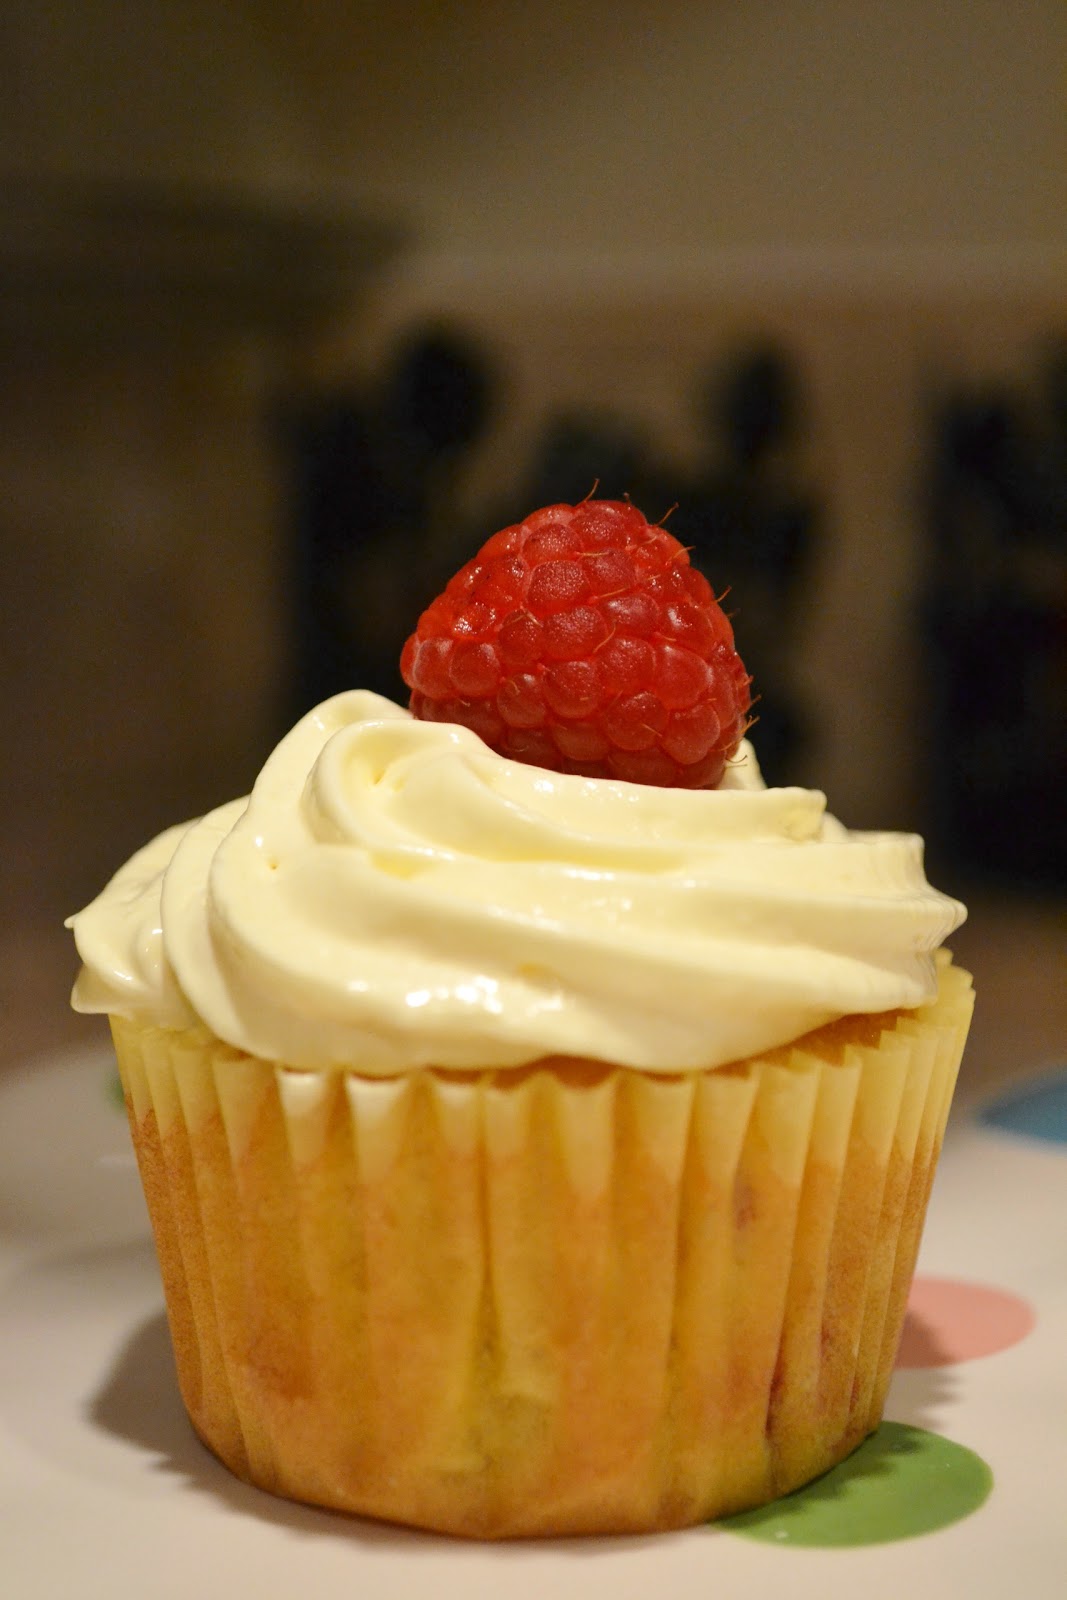 Whip Cream Frosting For Cupcakes